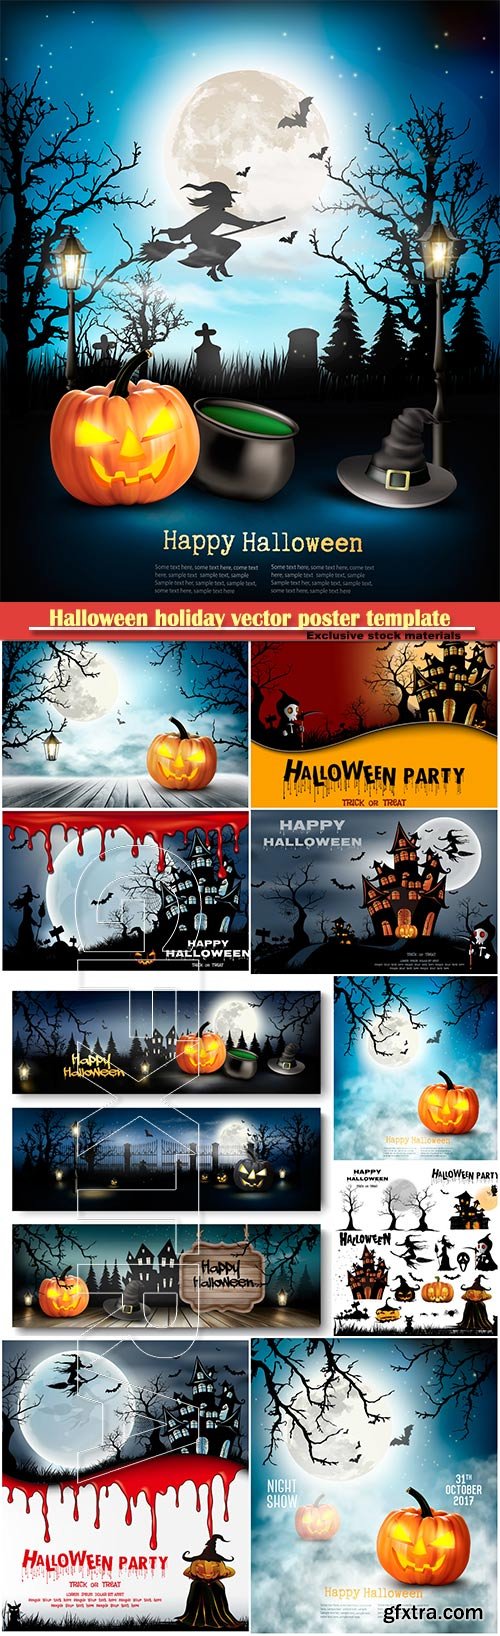 Halloween holiday vector poster template with pumpkin and moo